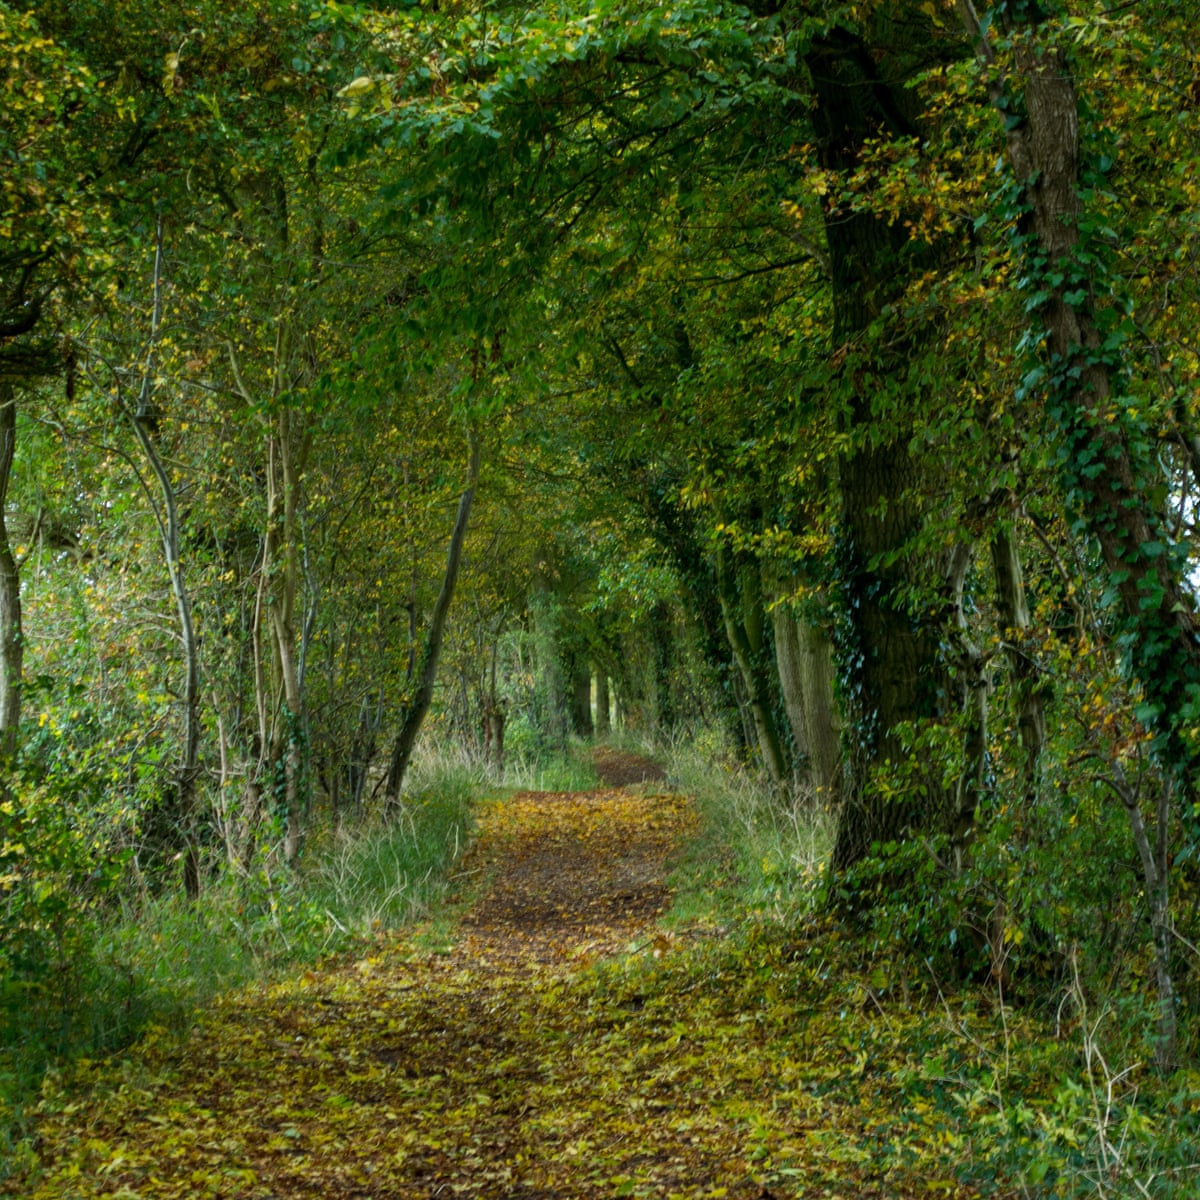 Restore Uk Woodland By Letting Trees Plant Themselves Says Report Trees And Forests The Guardian